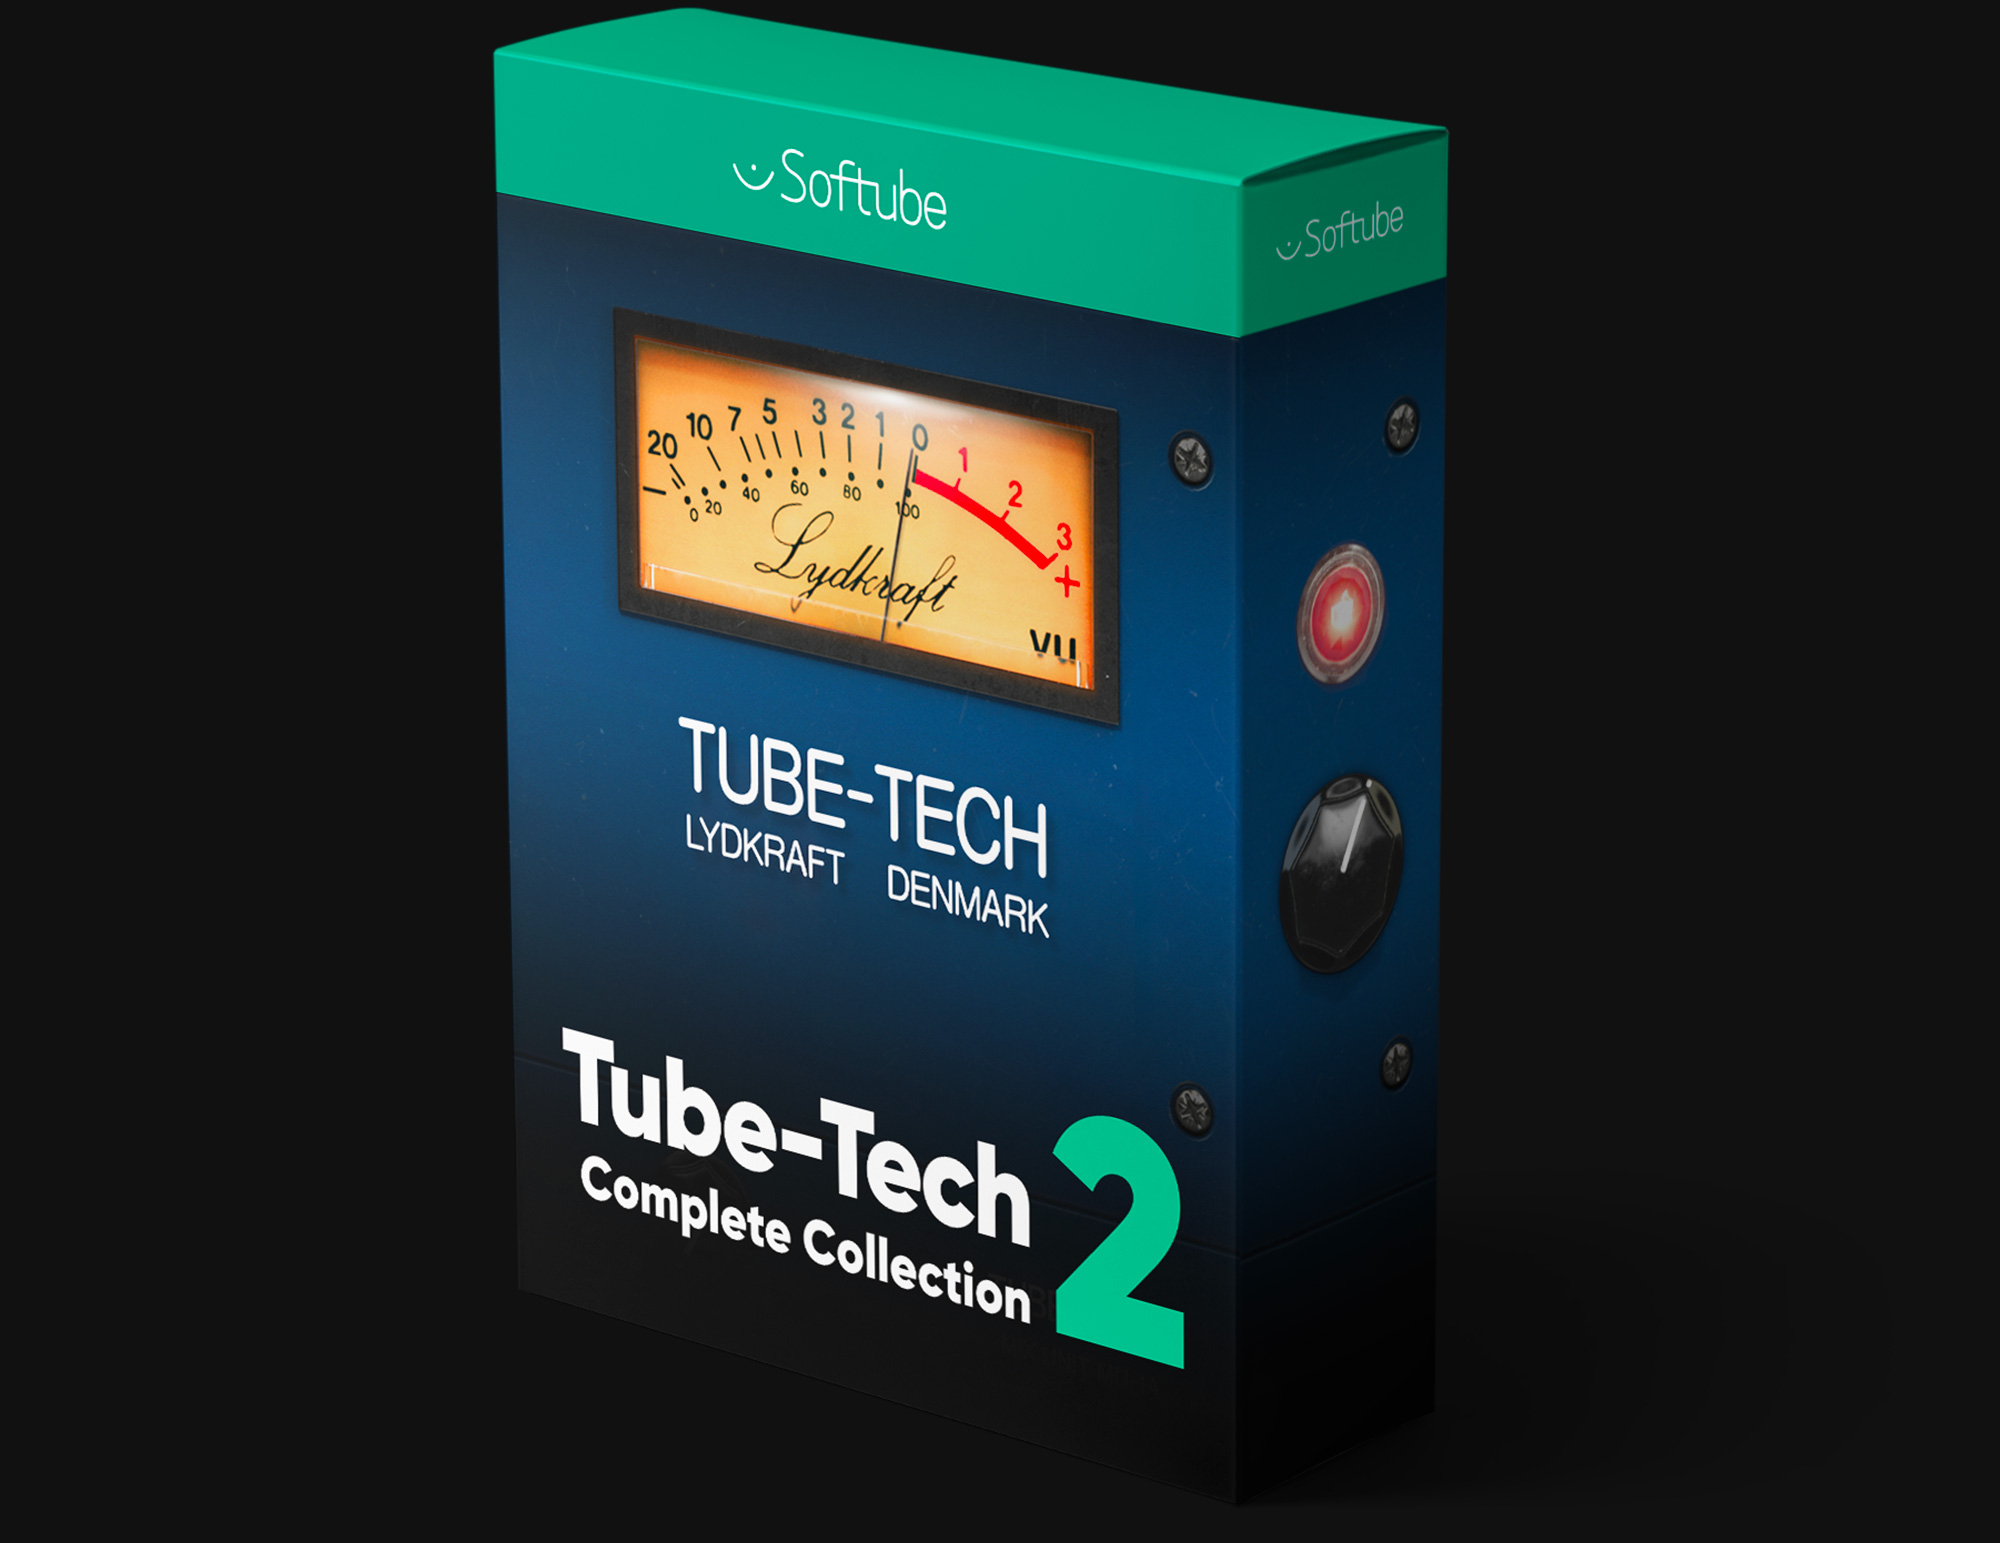 tube-tech-complete-collection-2.jpg